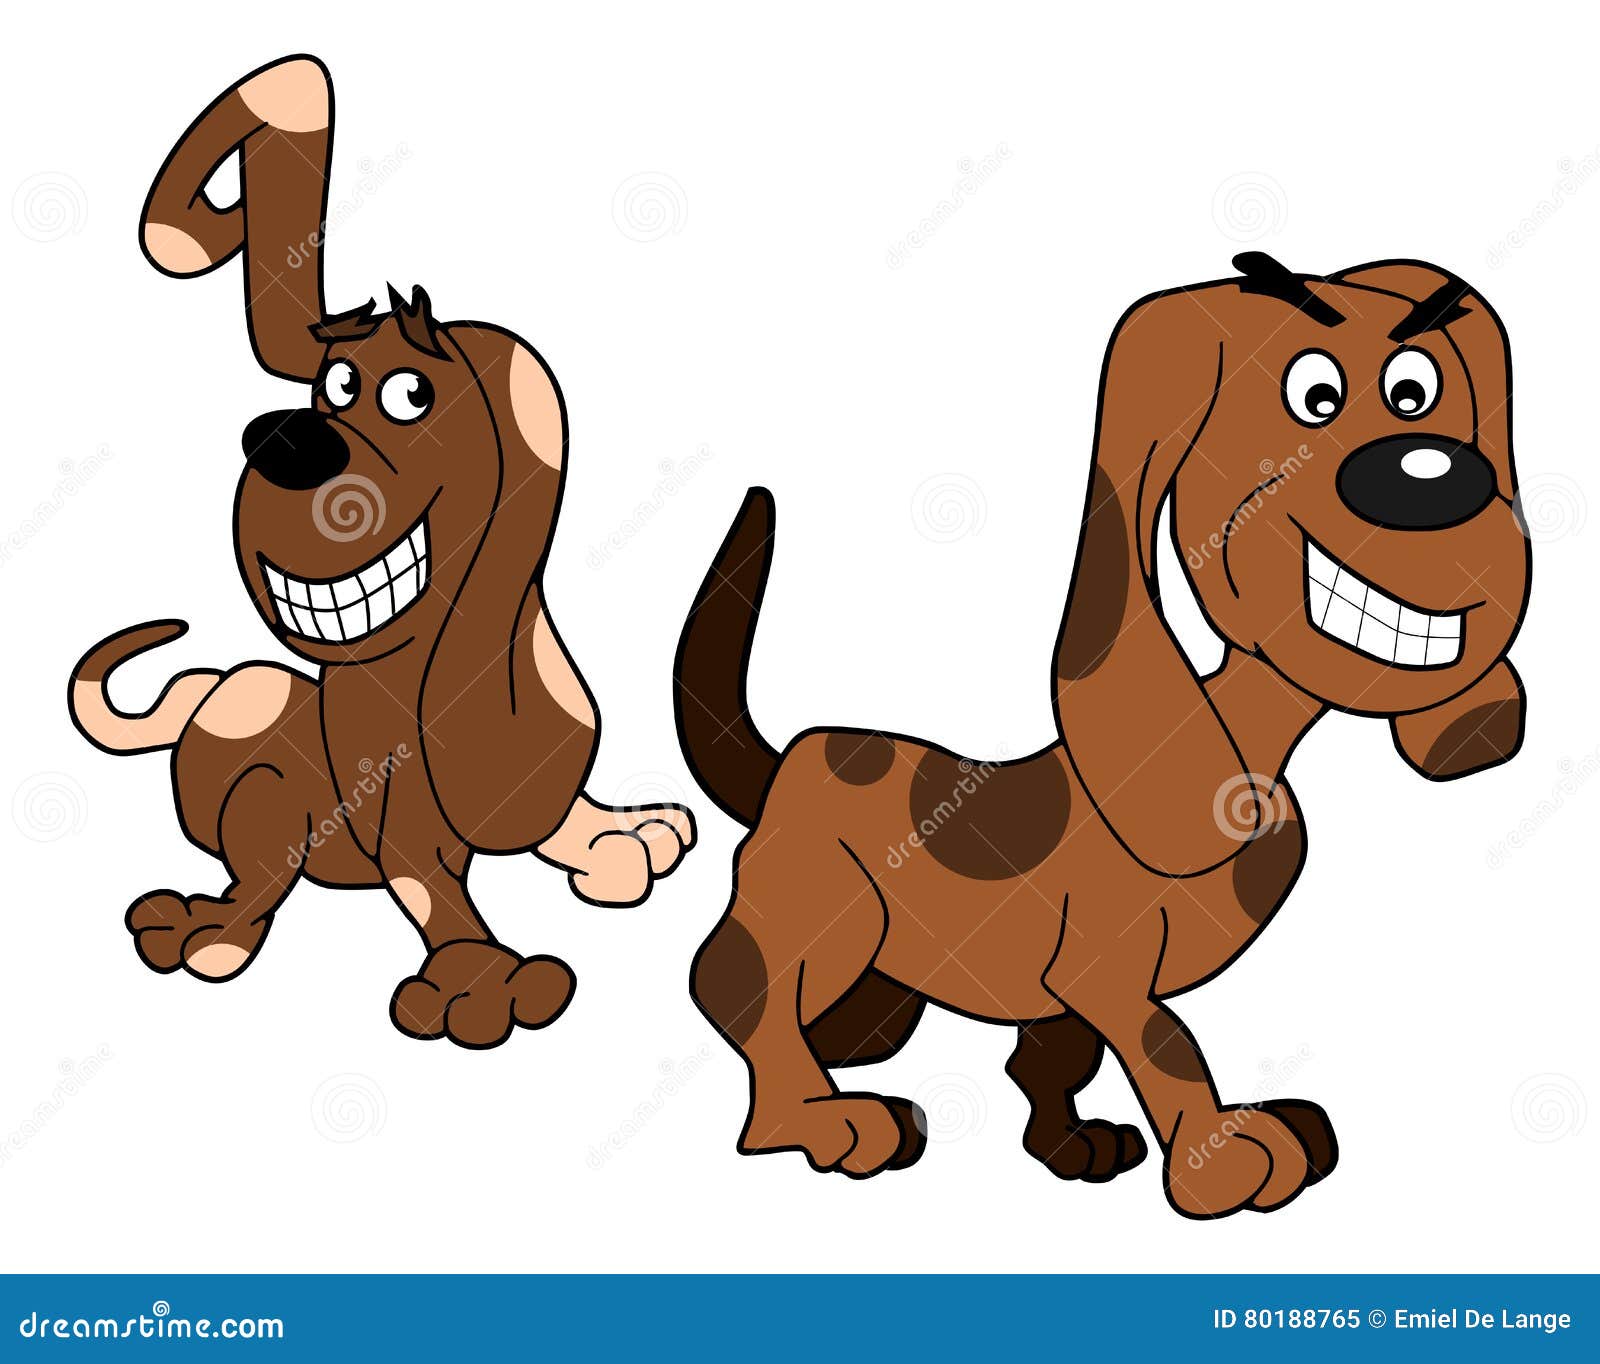 Two Cartoon Dogs Stock Illustrations 713 Two Cartoon Dogs Stock Illustrations Vectors Clipart Dreamstime